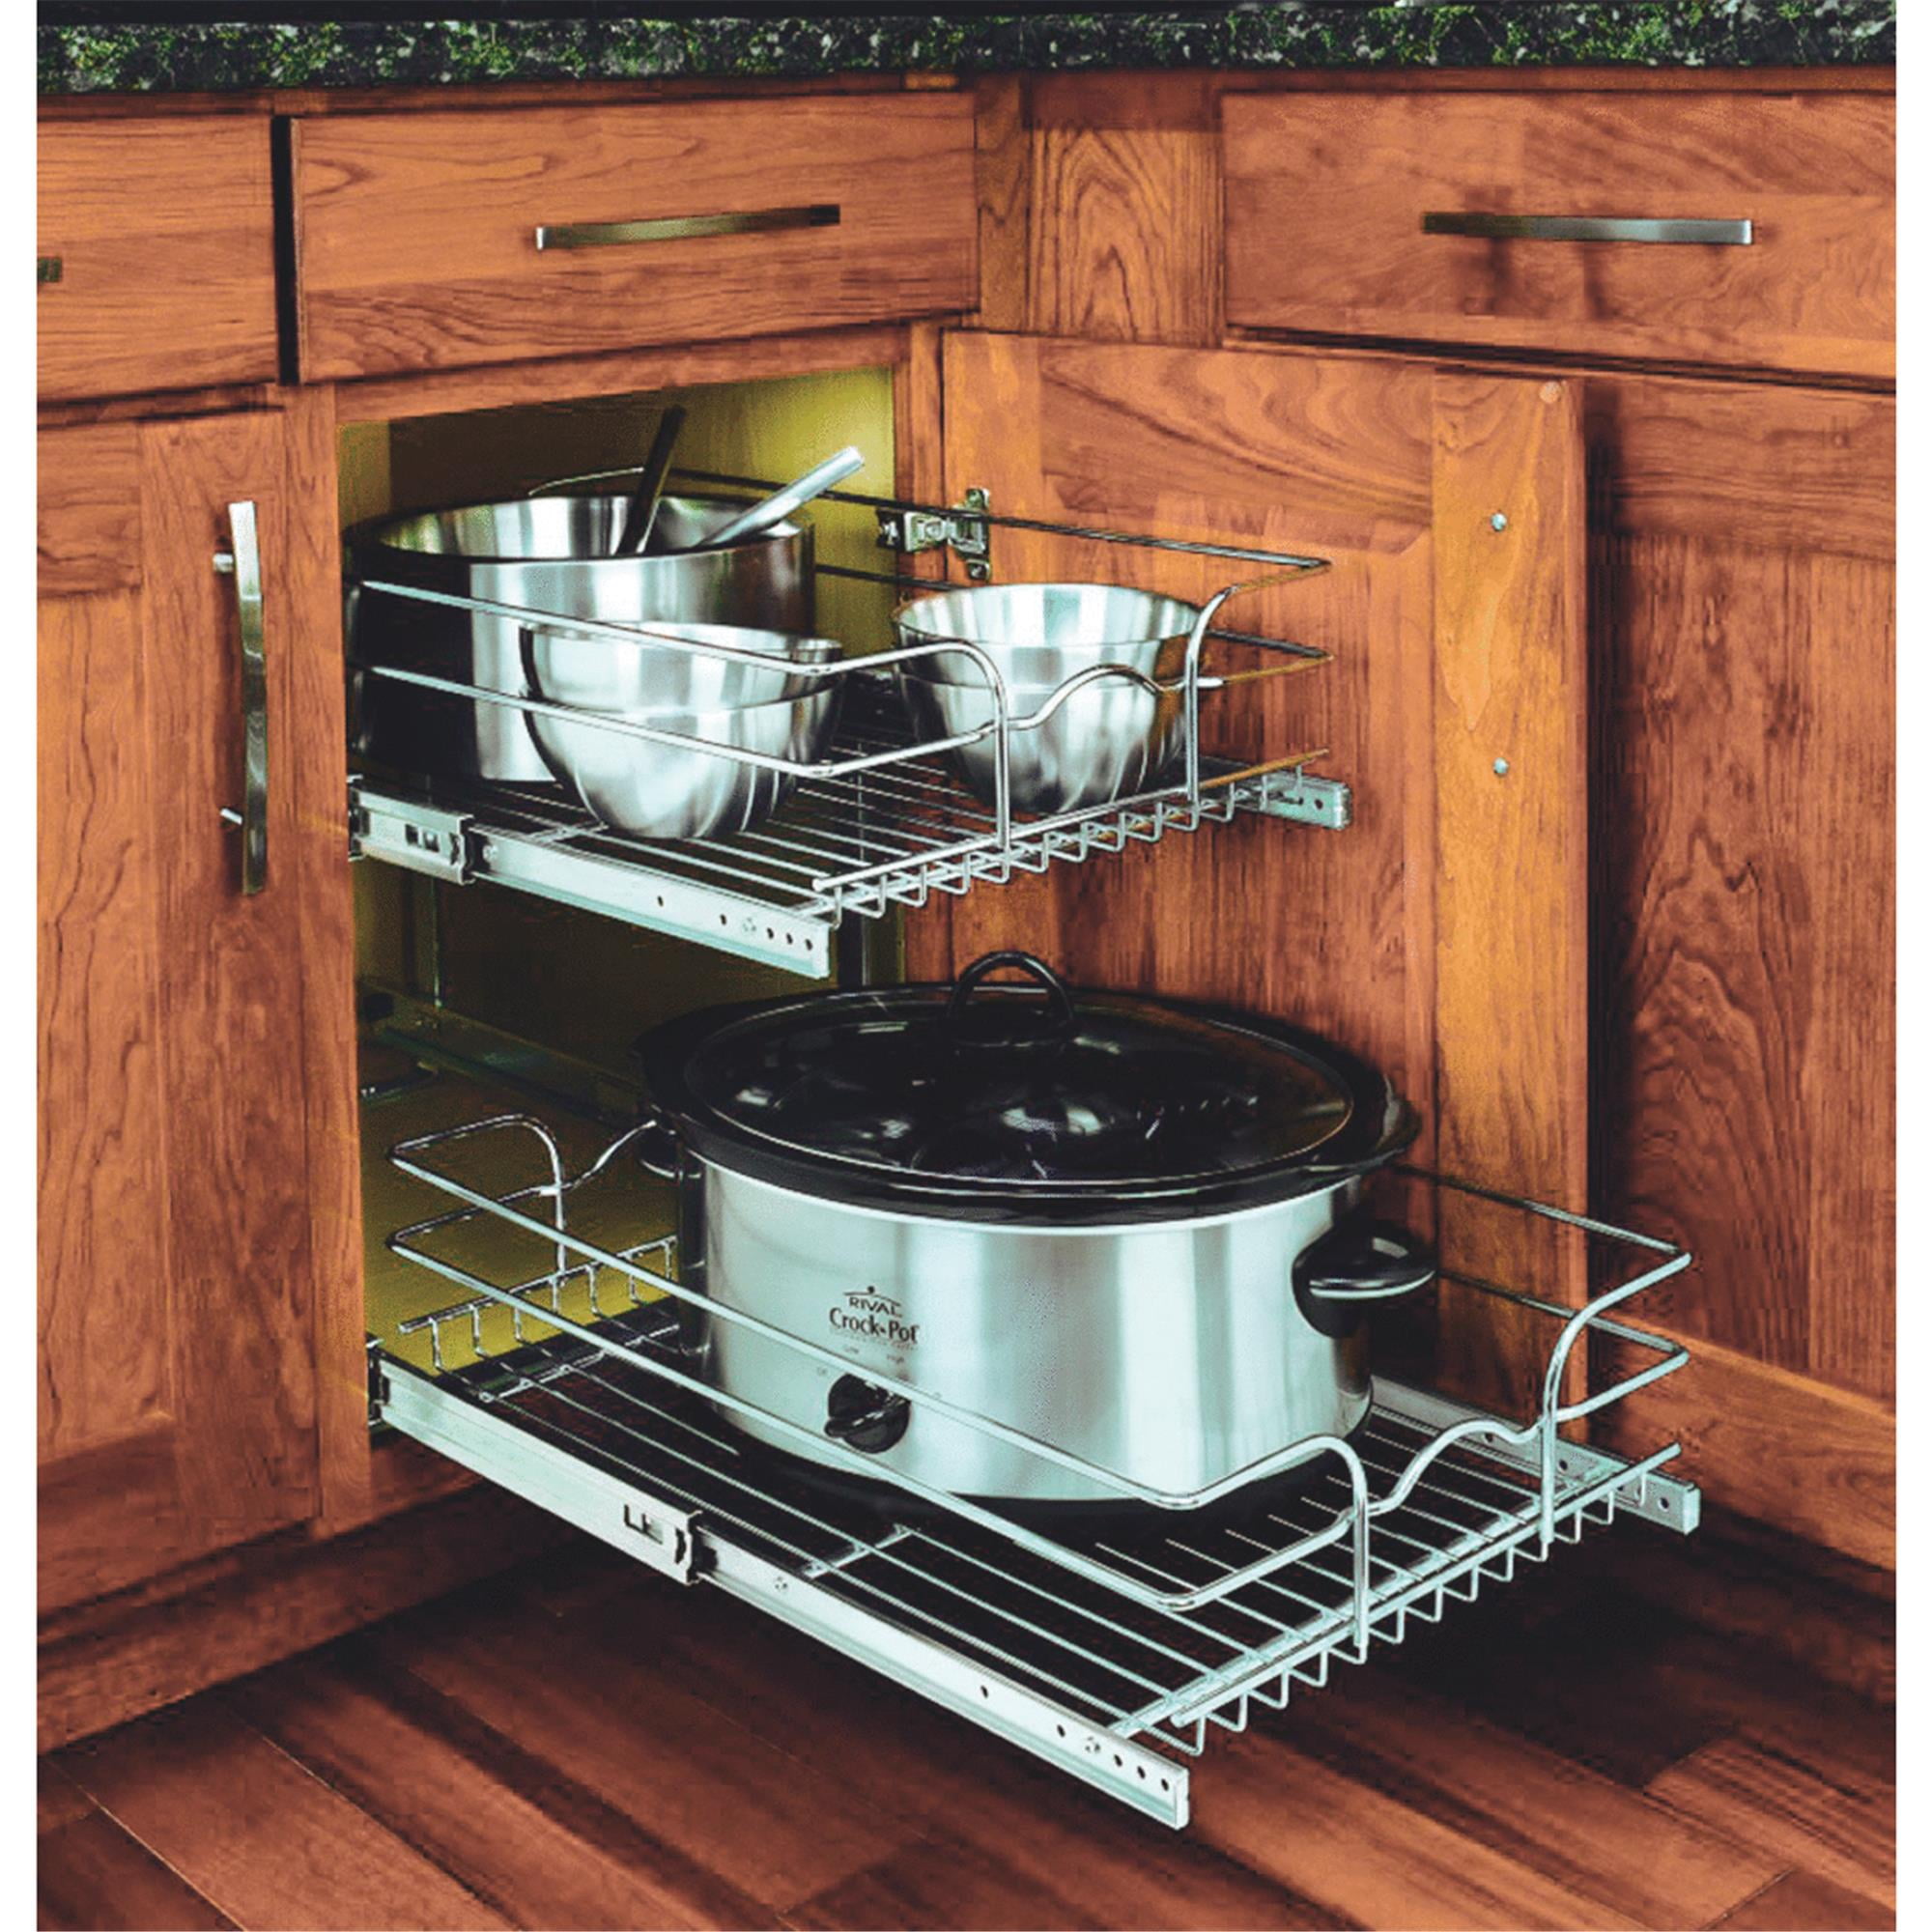 Pull Out Inserts For Kitchen Cabinets – Kitchen Info